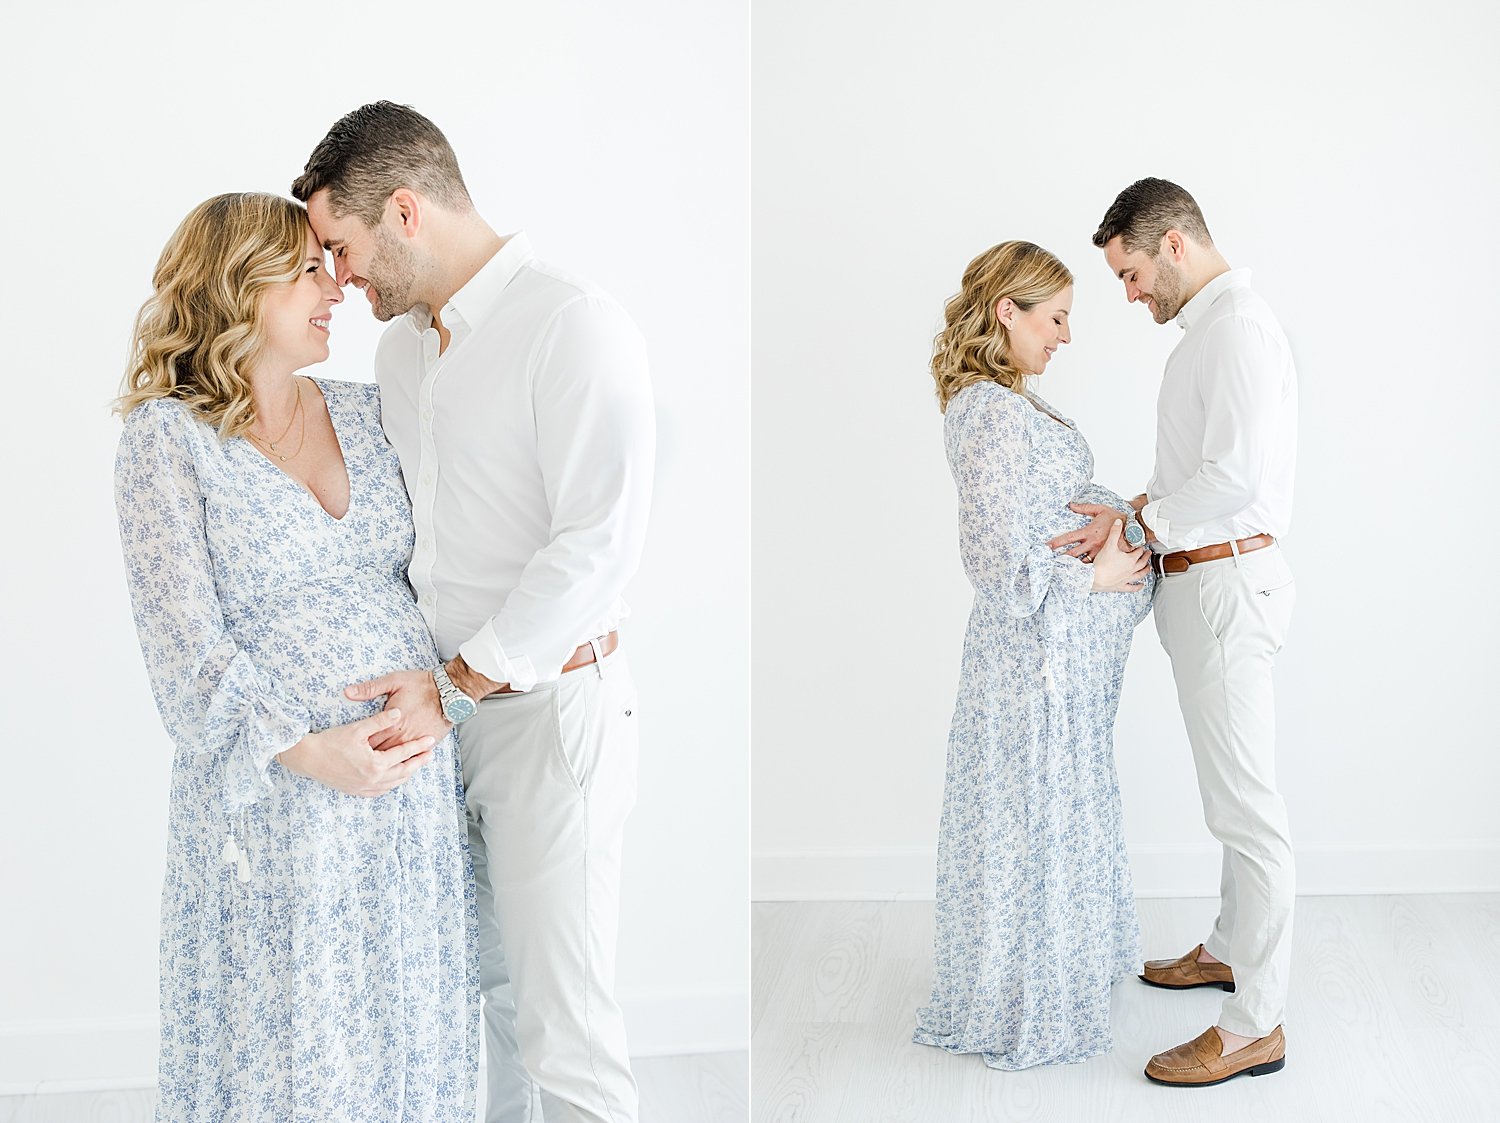 Sweet moments between expecting parents during maternity photoshoot with Kristin Wood Photography.